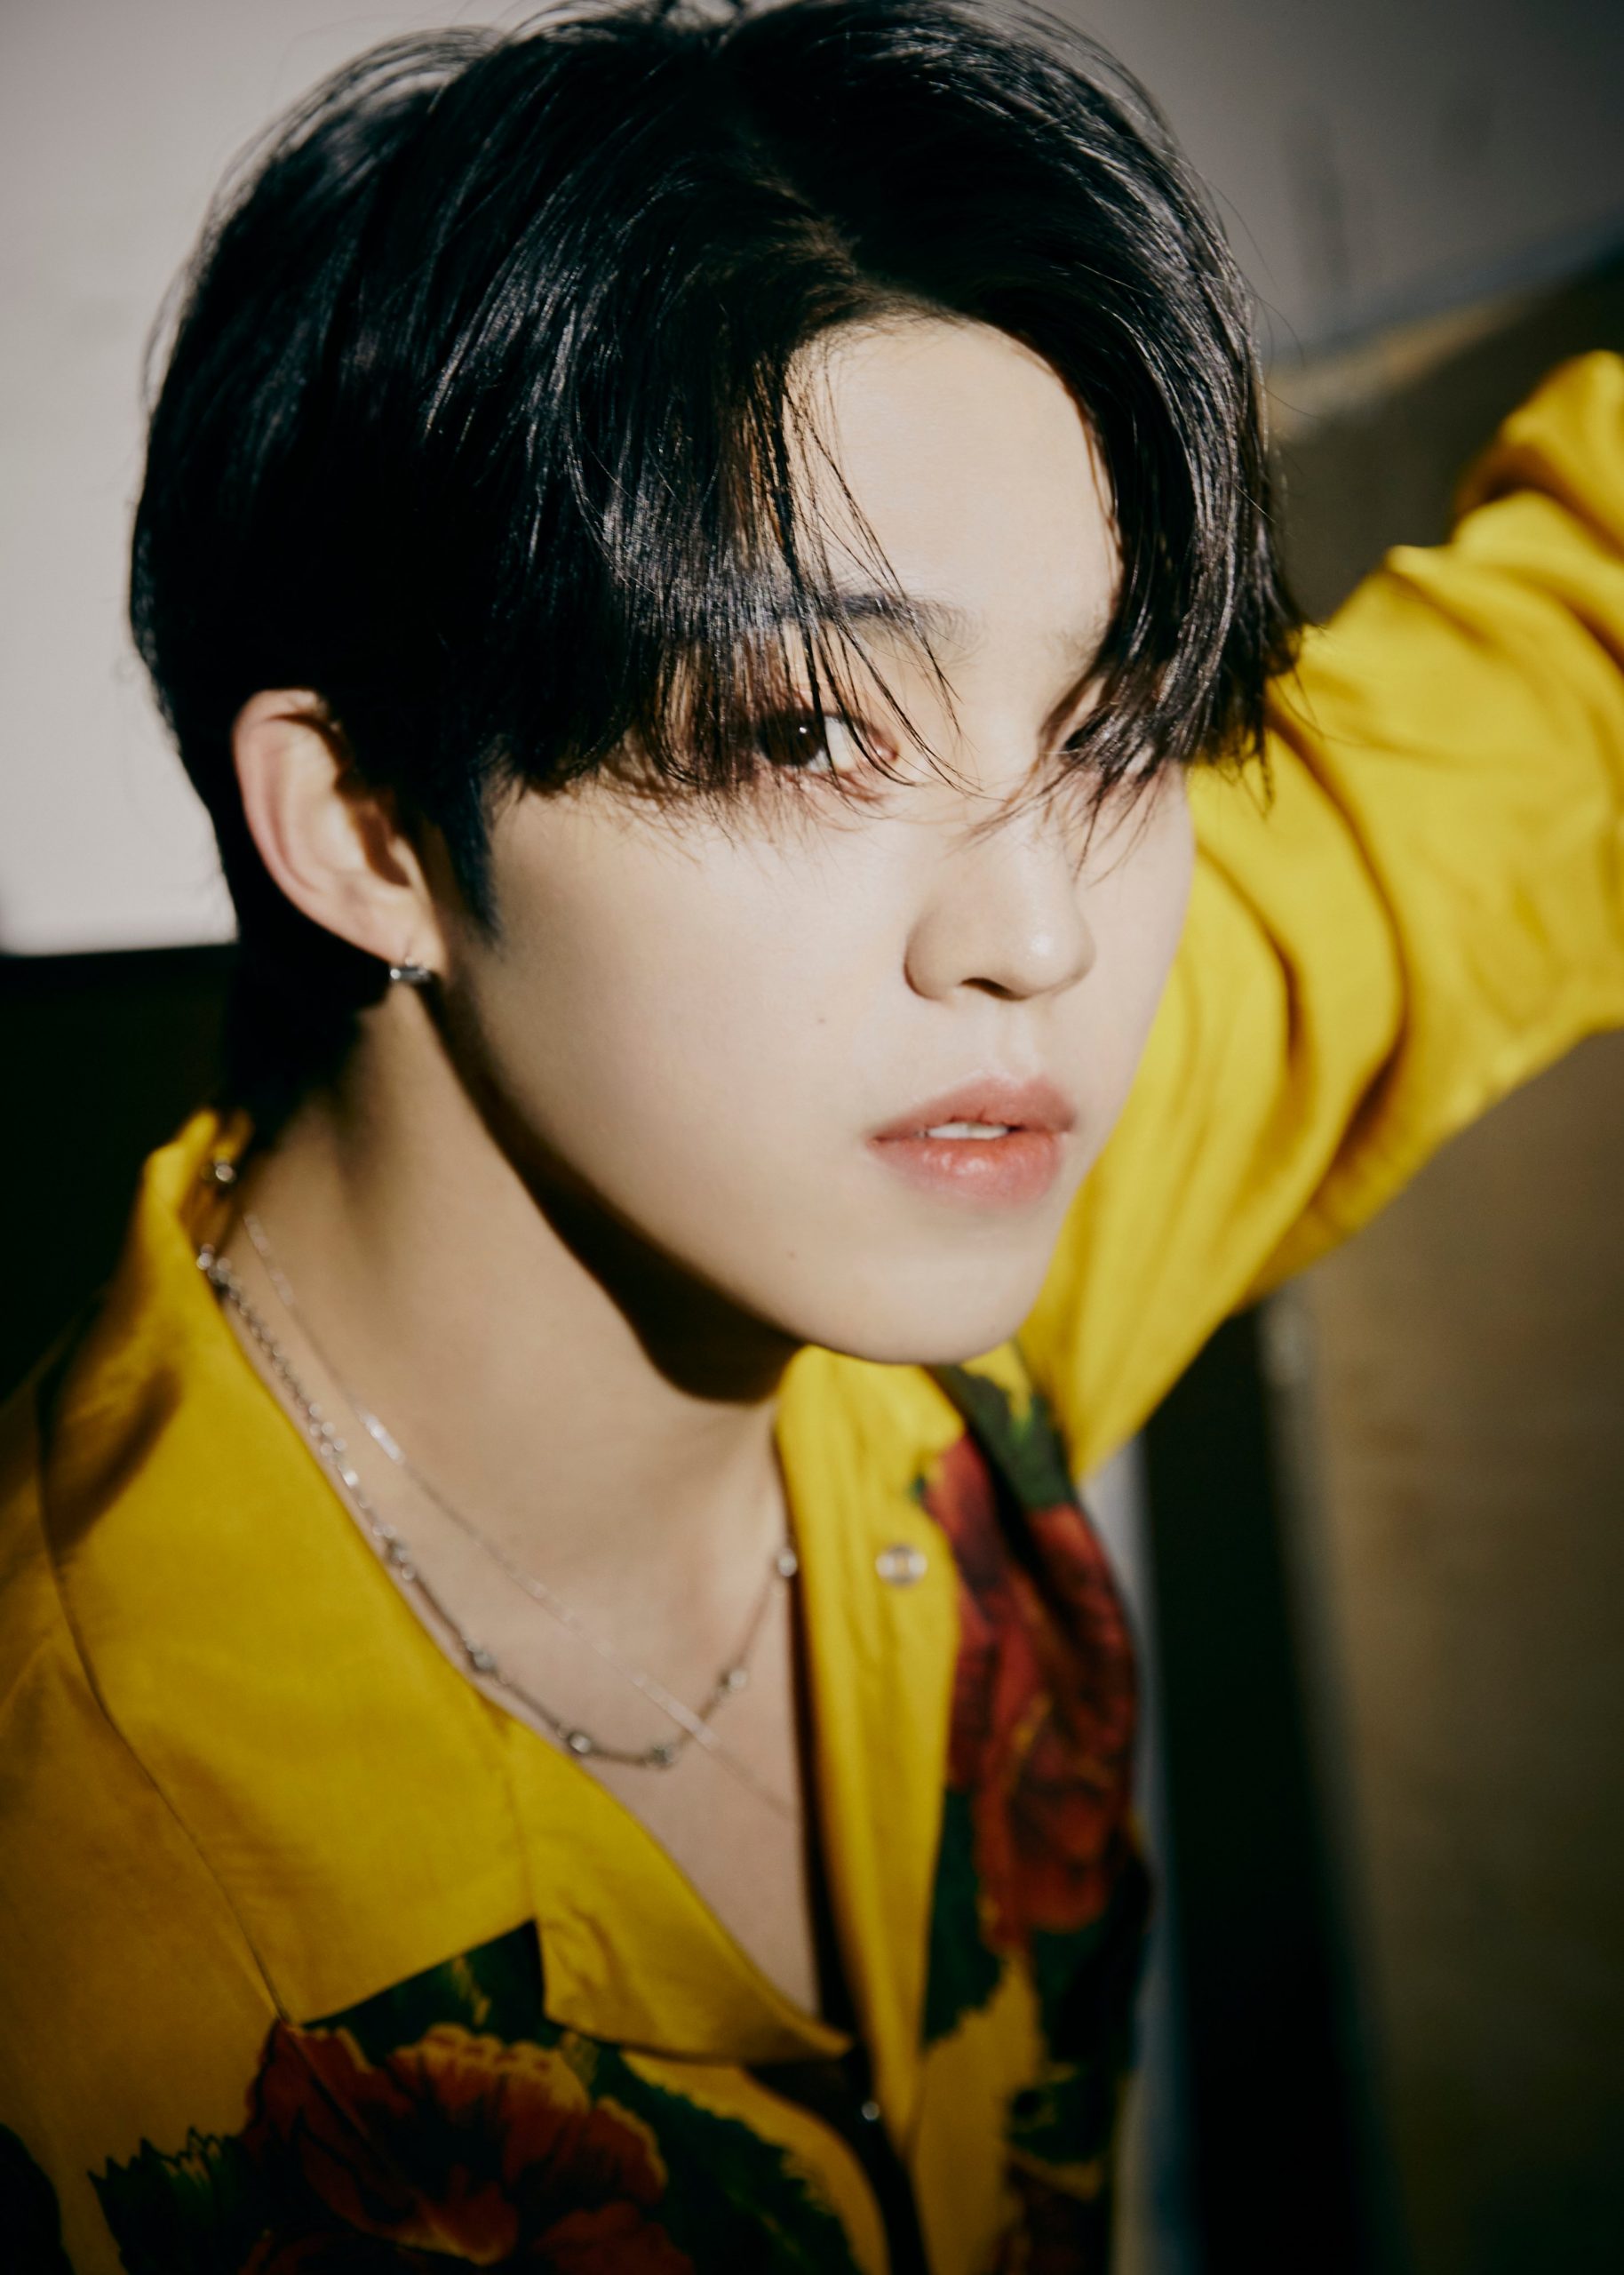 S.Coups (Seventeen Member) Age, Bio, Wiki, Facts & More